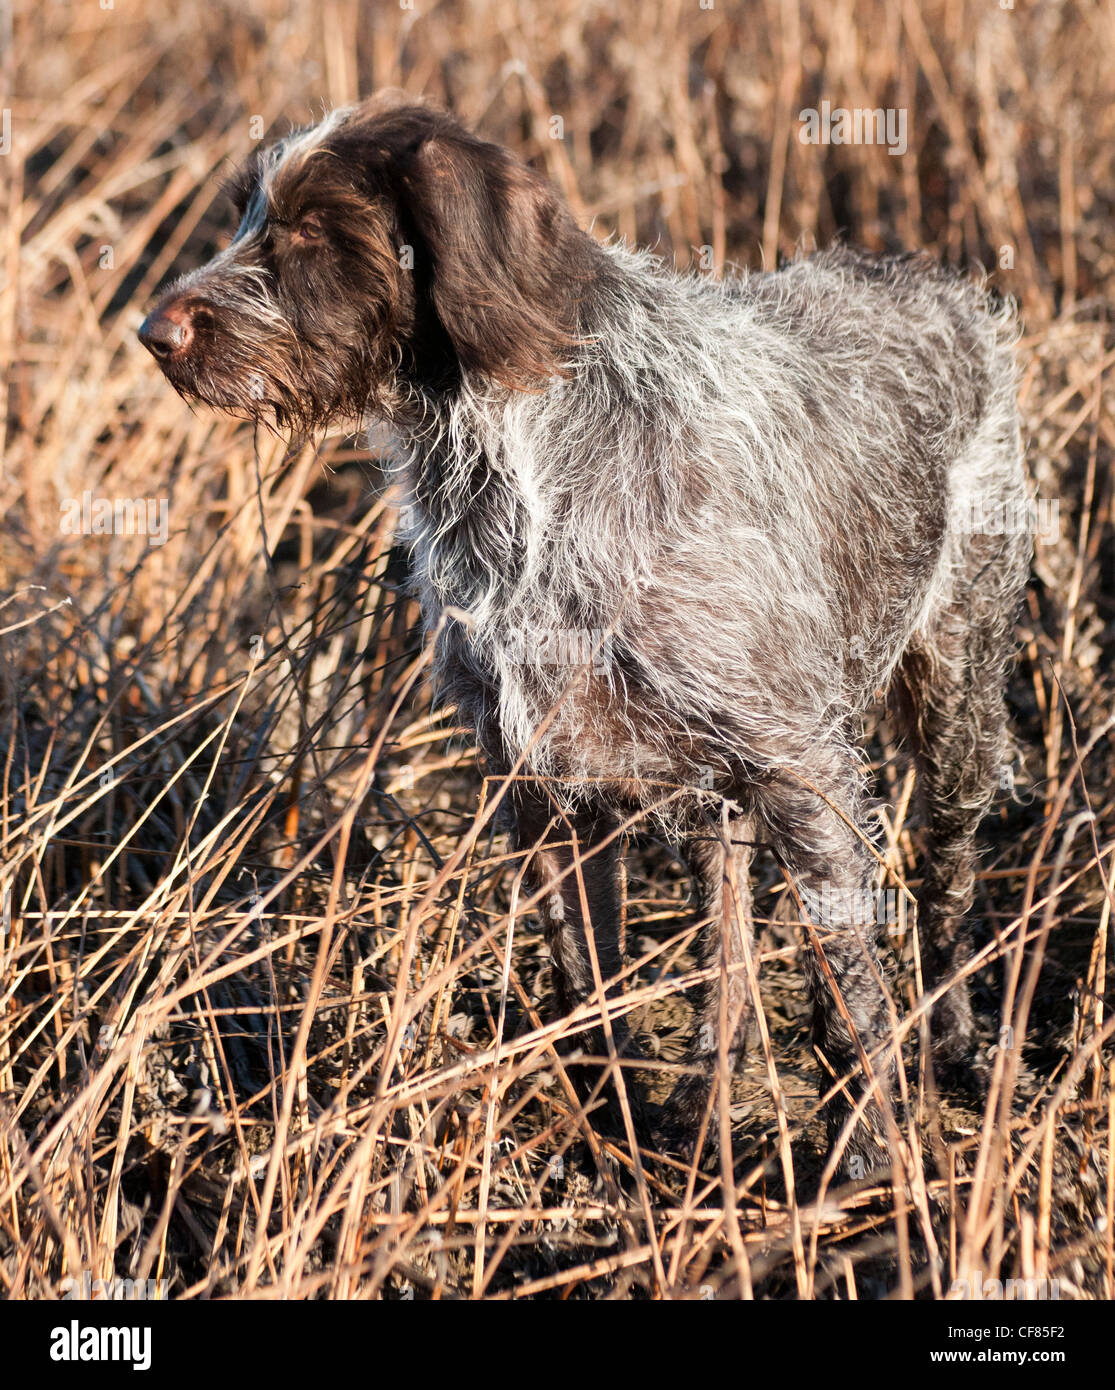 A German Wired Haired Pointer dog stood in a field Stock Photo